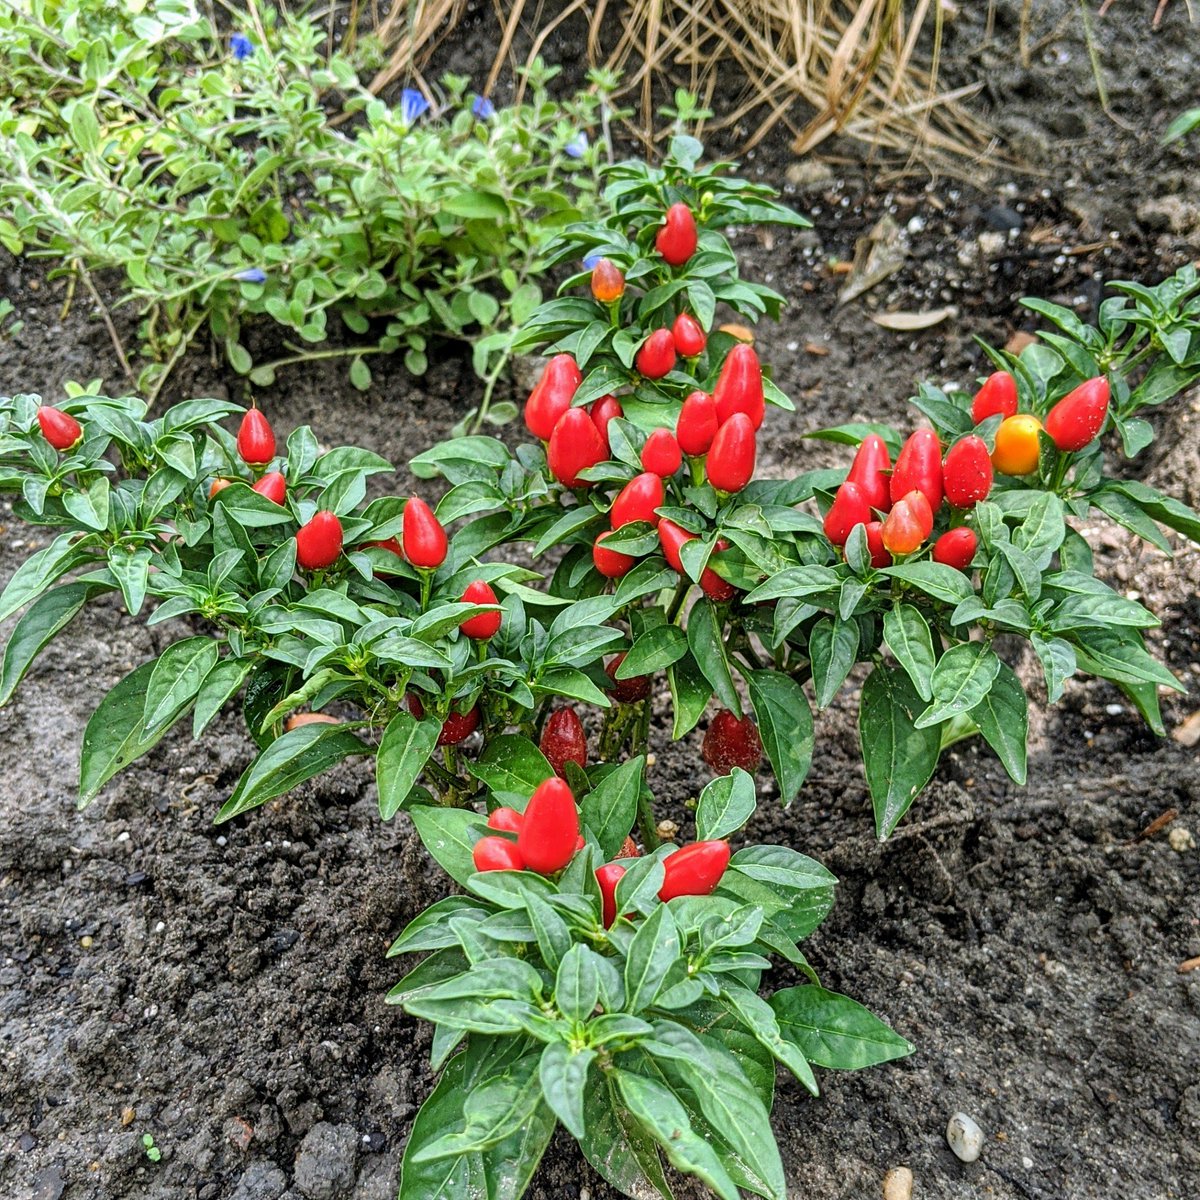 Ornamental peppers - not sure which variety this is... I bought a mix.Definitely not native. But they're pretty and cheap.Supposedly edible, but not very tasty as they are bred for looks and not taste.